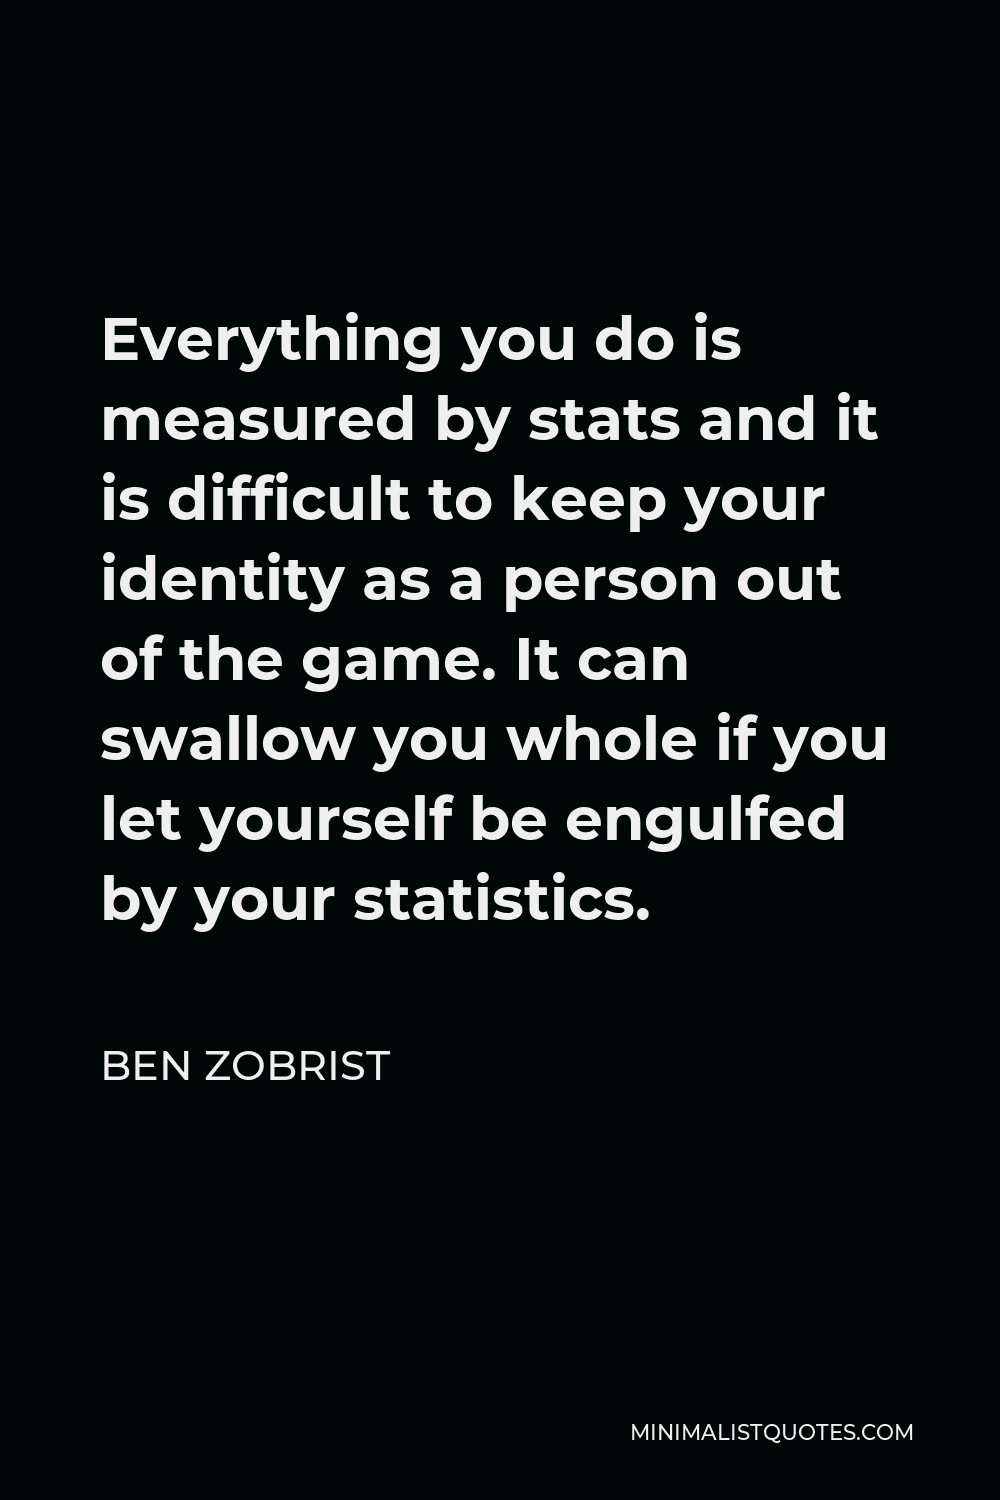 Ben Zobrist Quote - Everything you do is measured by stats and it is difficult to keep your identity as a person out of the game. It can swallow you whole if you let yourself be engulfed by your statistics.